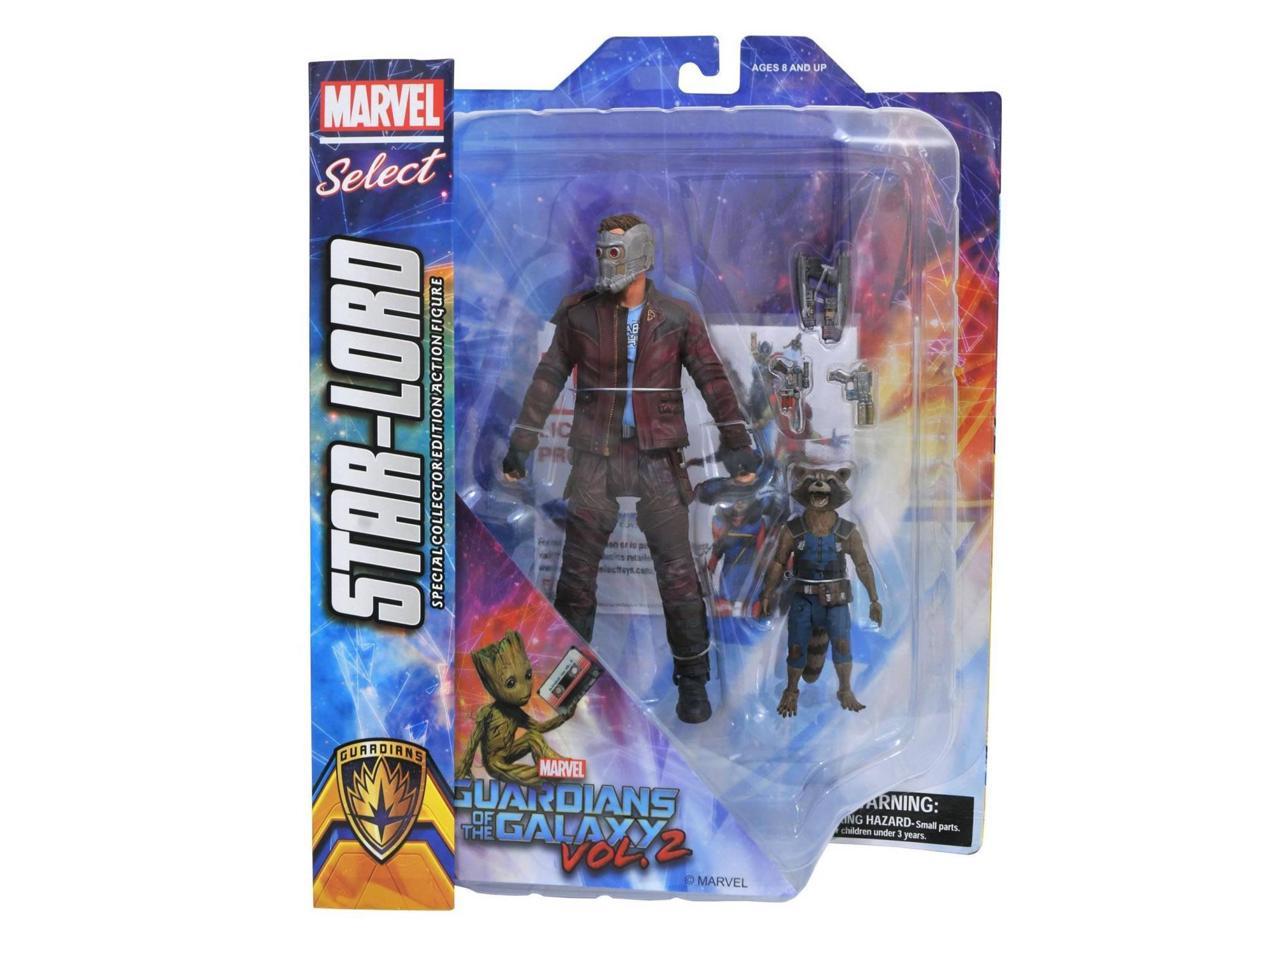 Marvel Diamond Select Legends 7" Star Lord Figure Guardians of Galaxy 2 MCU GOTG for sale online 